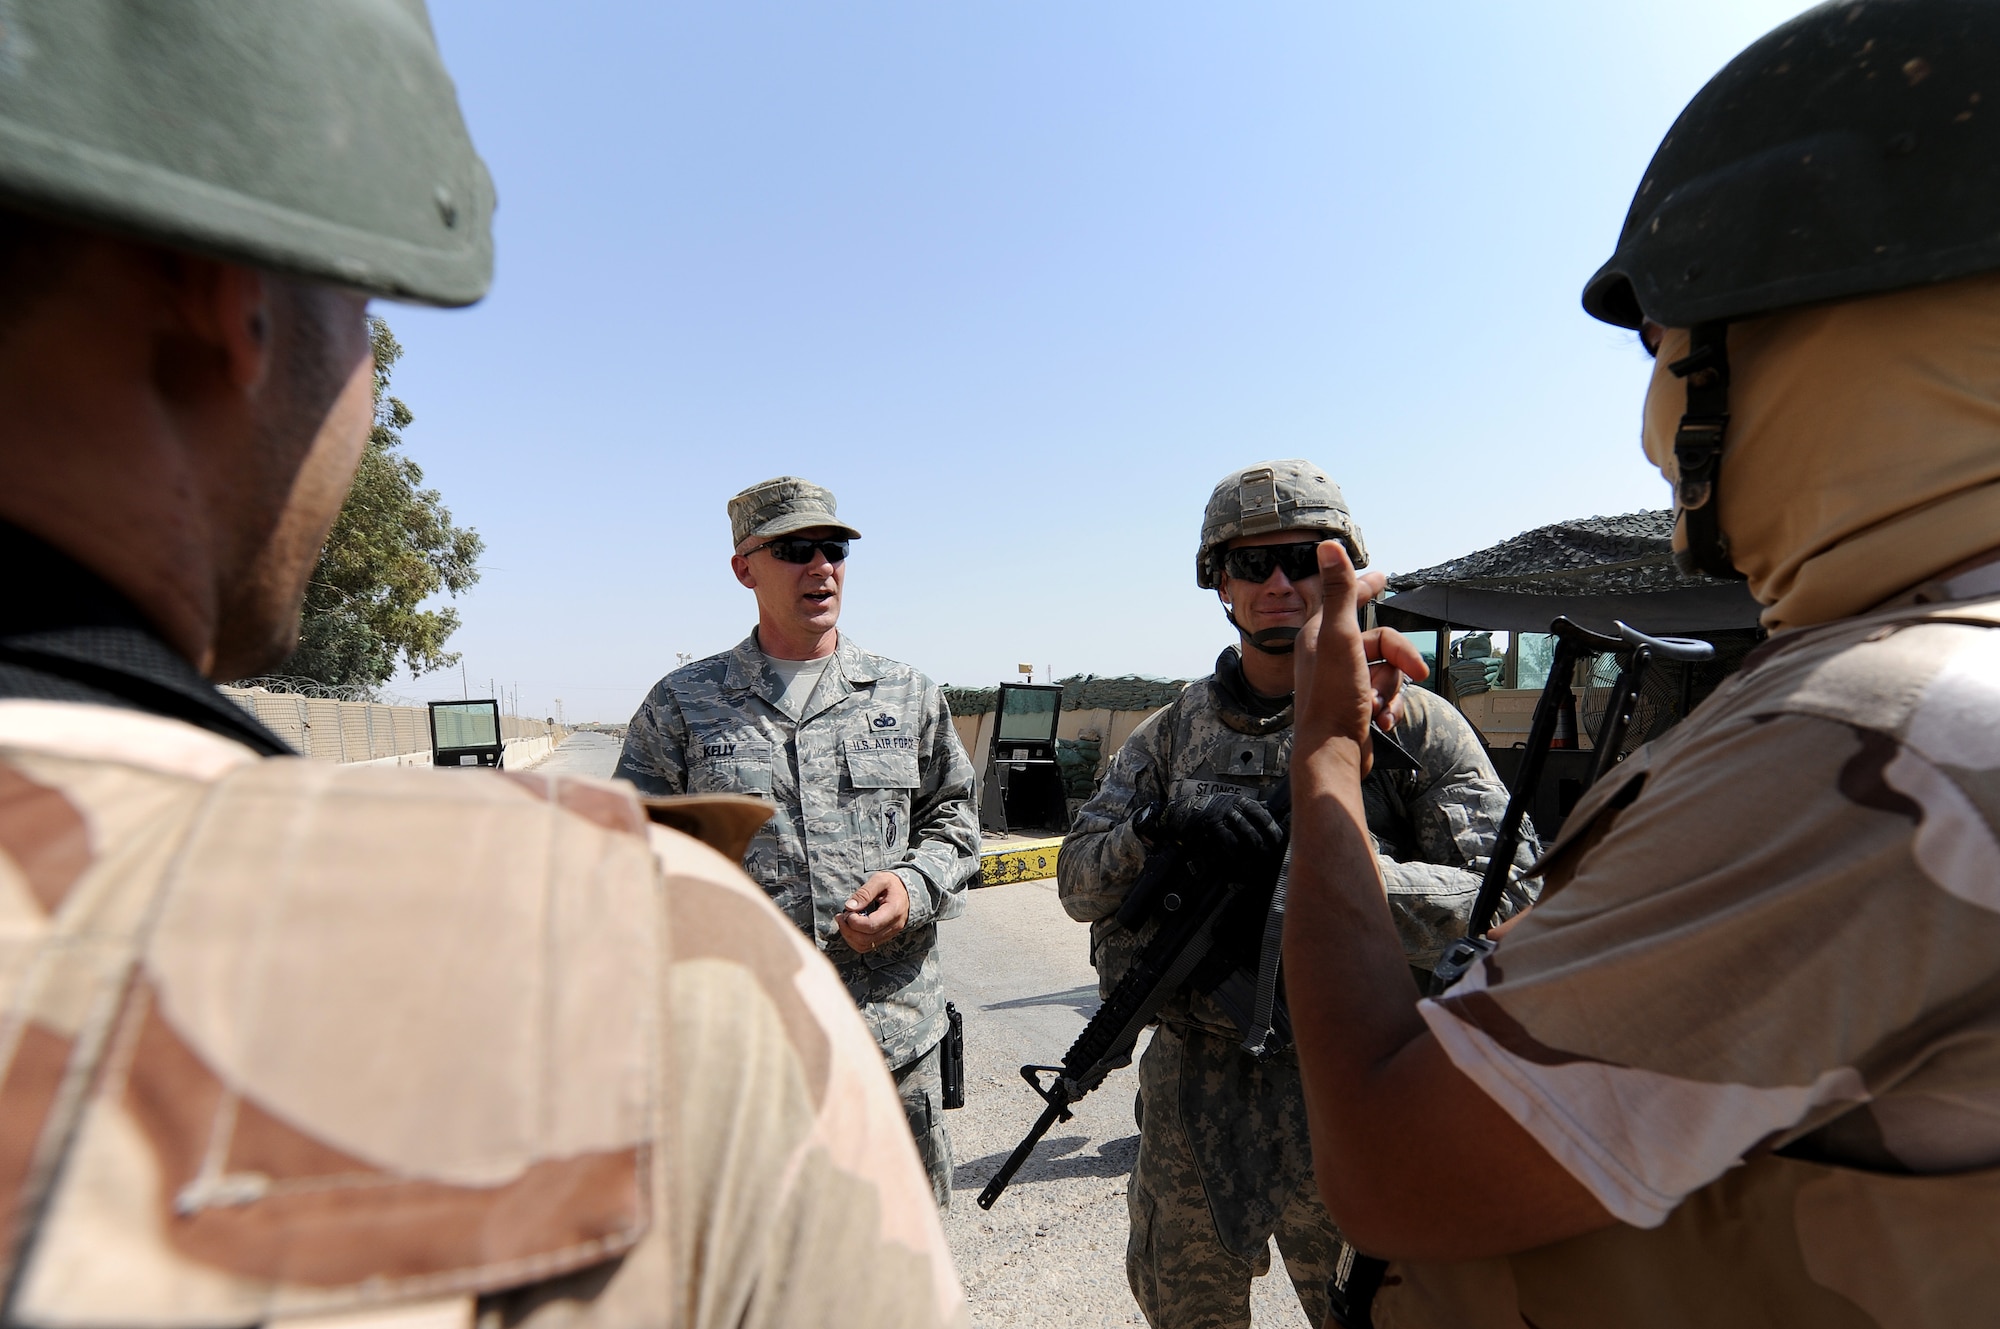 Master Sgt. Daren Kelly, 321st Expeditionary Mission Support Advisory Group Security Forces Advisor, talks to Iraqis about their vehicles searches at Kirkuk Air Base. Sergeant Kelly composed the basic defense manual for the Iraqis to tell them how to conduct base defense. (U.S. Air Force photo by Senior Airman Tristin English)